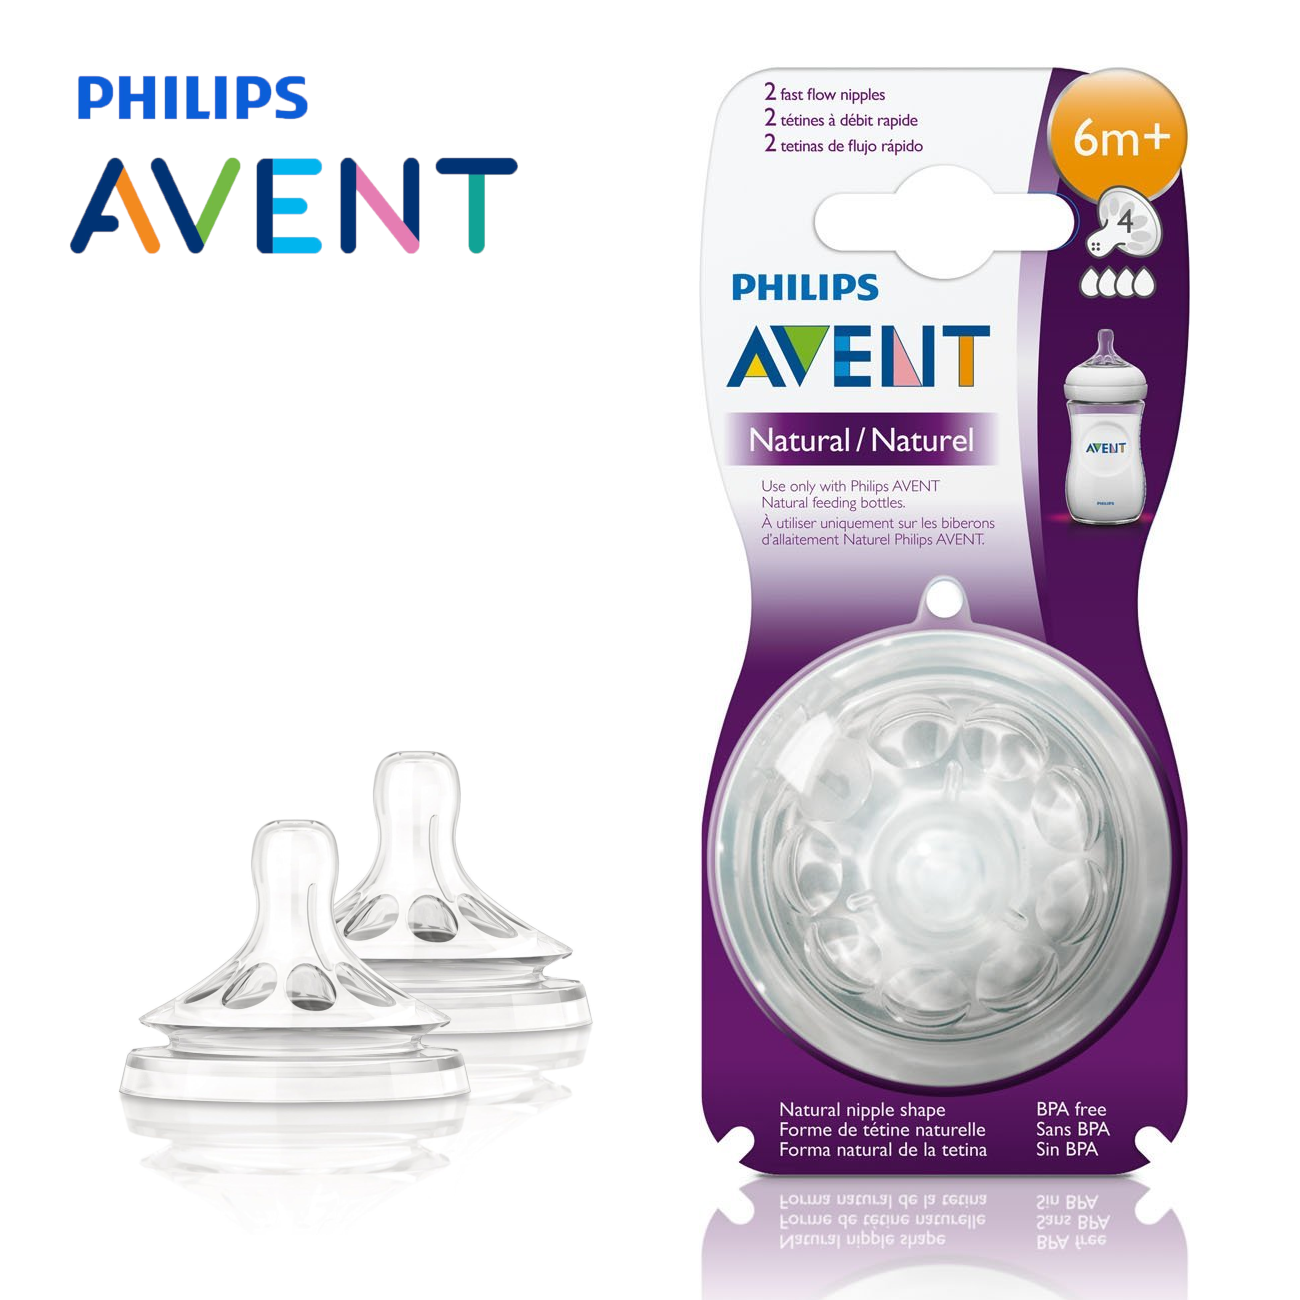 Philips AVENT BPA Free Natural Fast Flow Nipples, Pack of 2